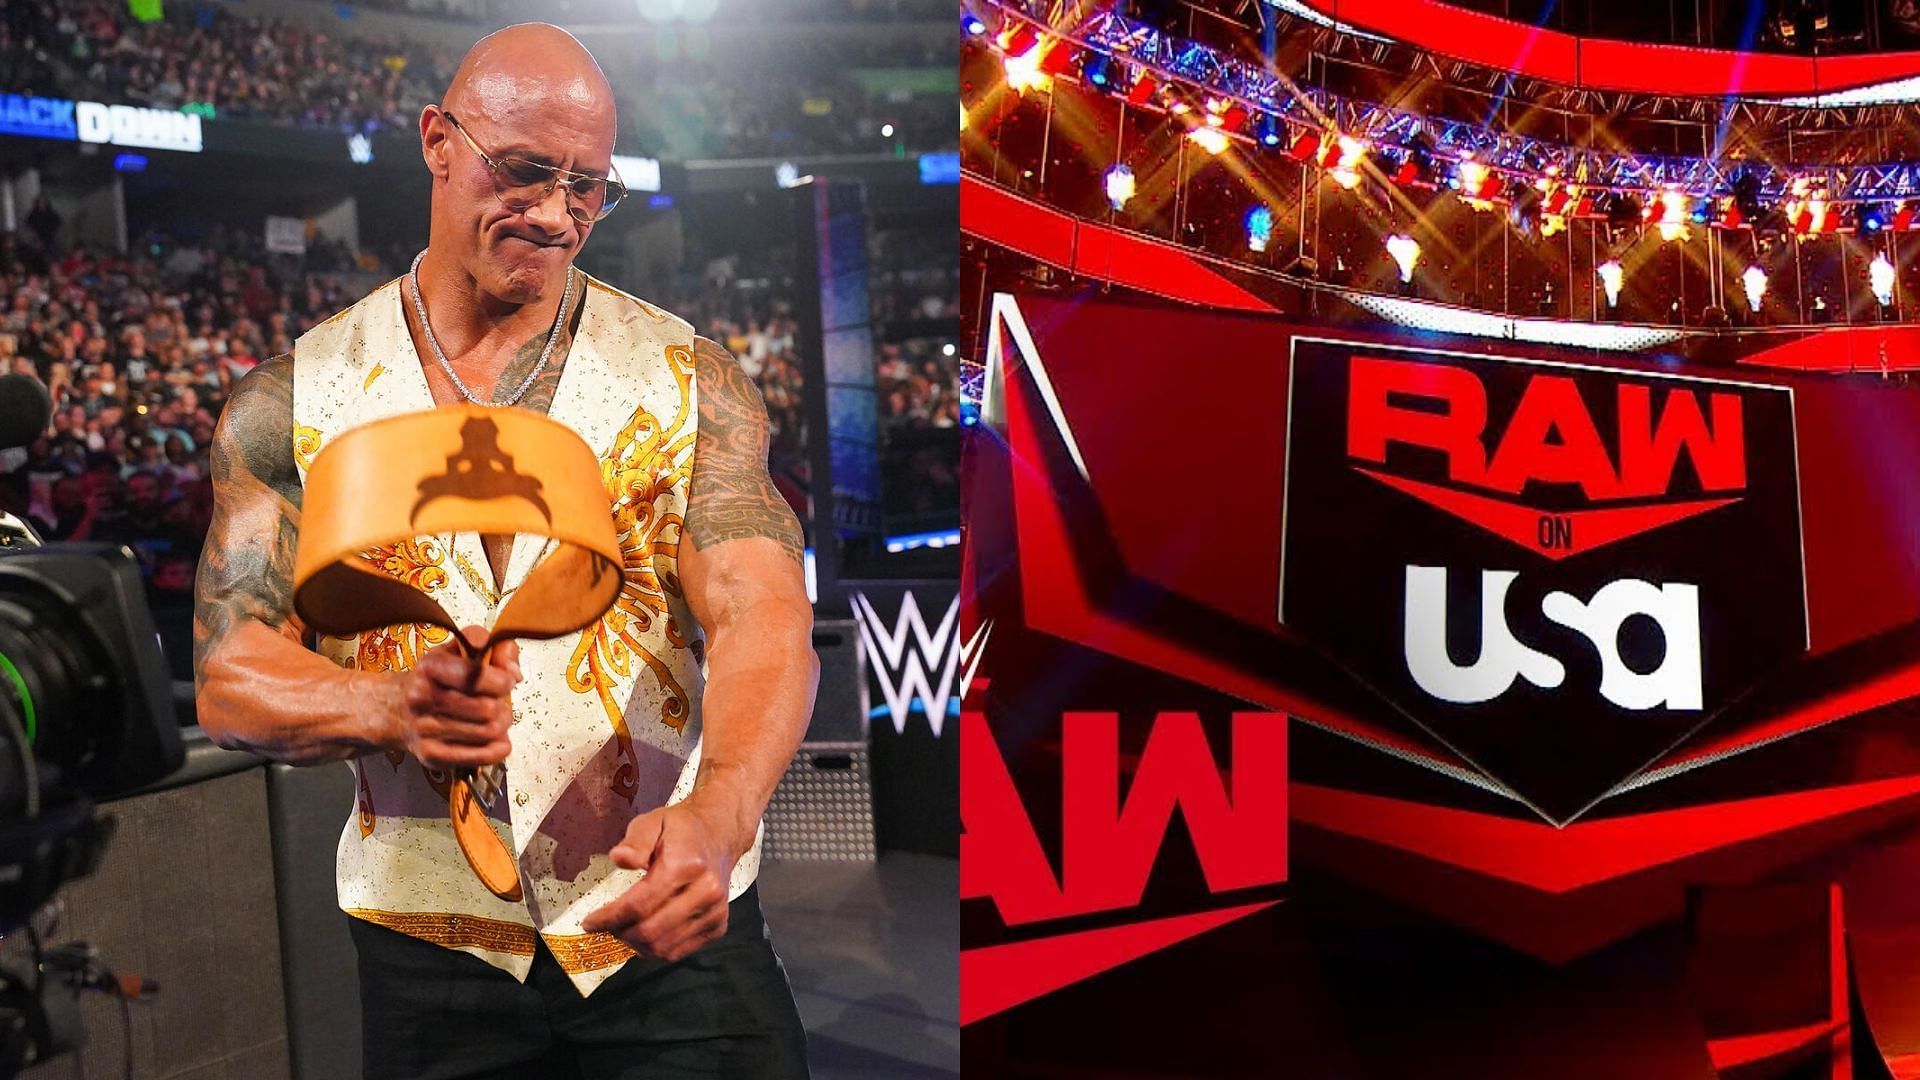 The Rock made an appearance on WWE RAW this week